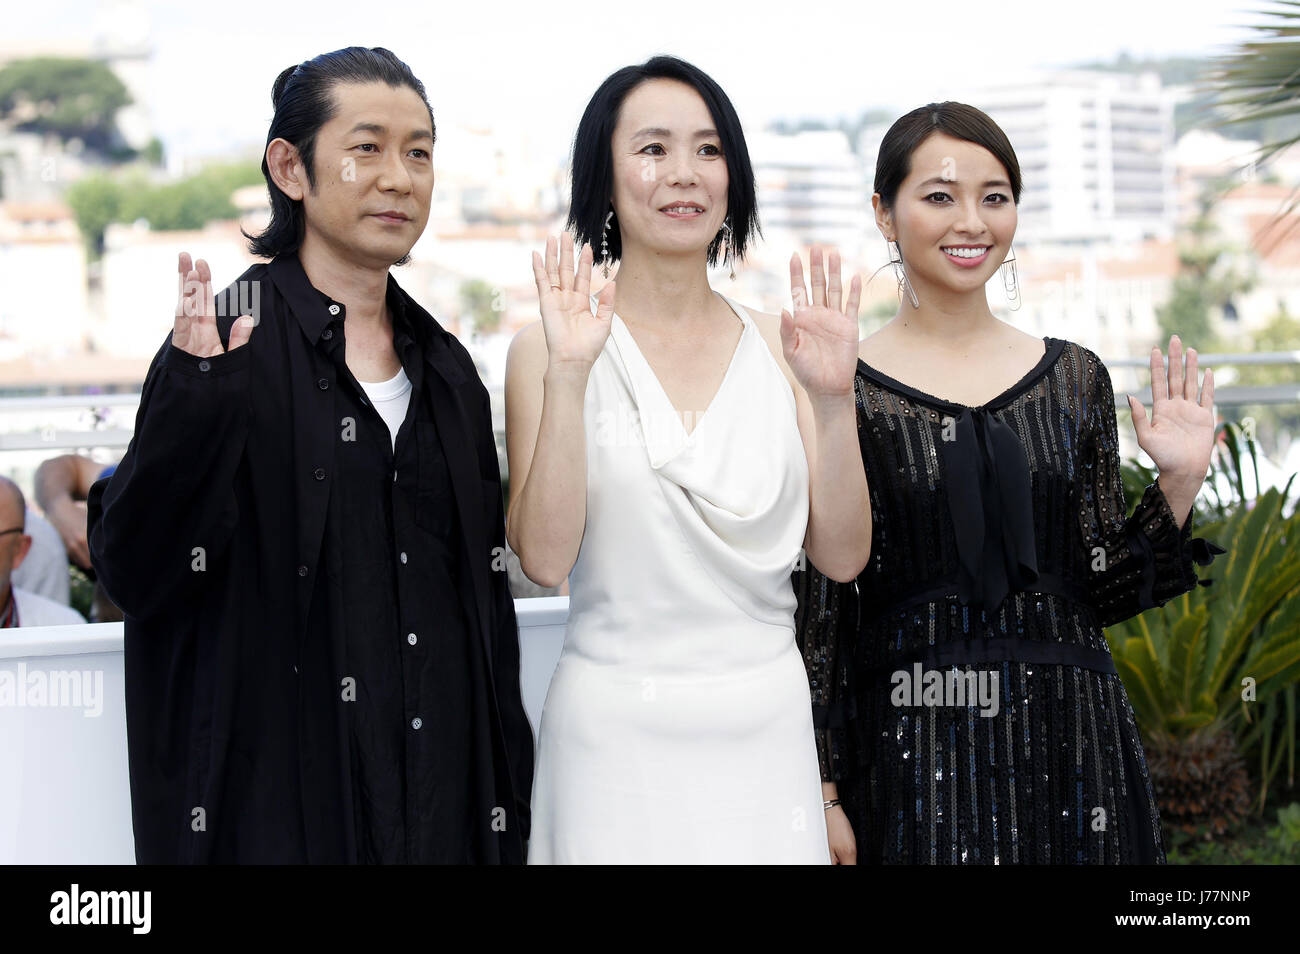 Masatoshi Nagase, Misuzu Kanno and Ayame Misaki at the 'Radiance / Hikari / Vers la lumière' photocall during the 70th Cannes Film Festival at the Palais des Festivals on May 23, 2017 in Cannes, France | Verwendung weltweit Stock Photo